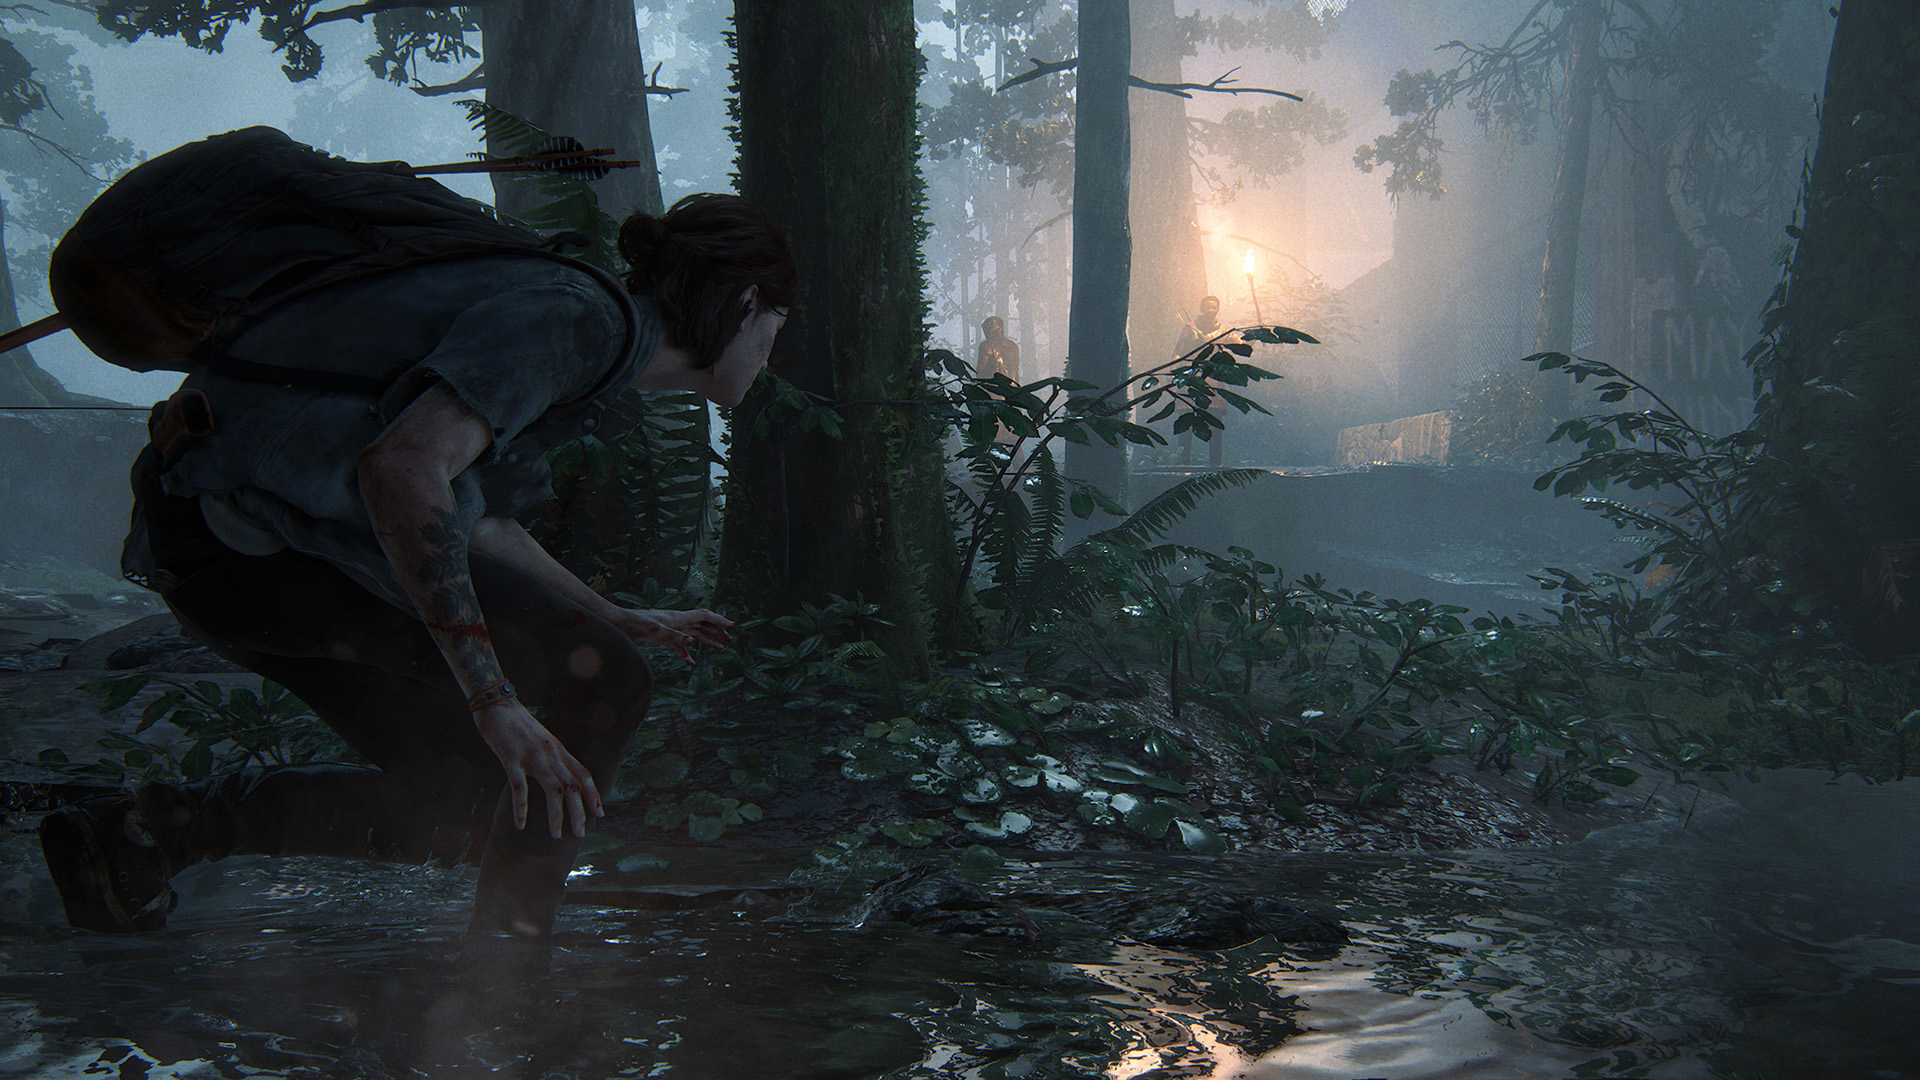 The Last of Us': Most Shocking Moments of Episode 2 - Metacritic